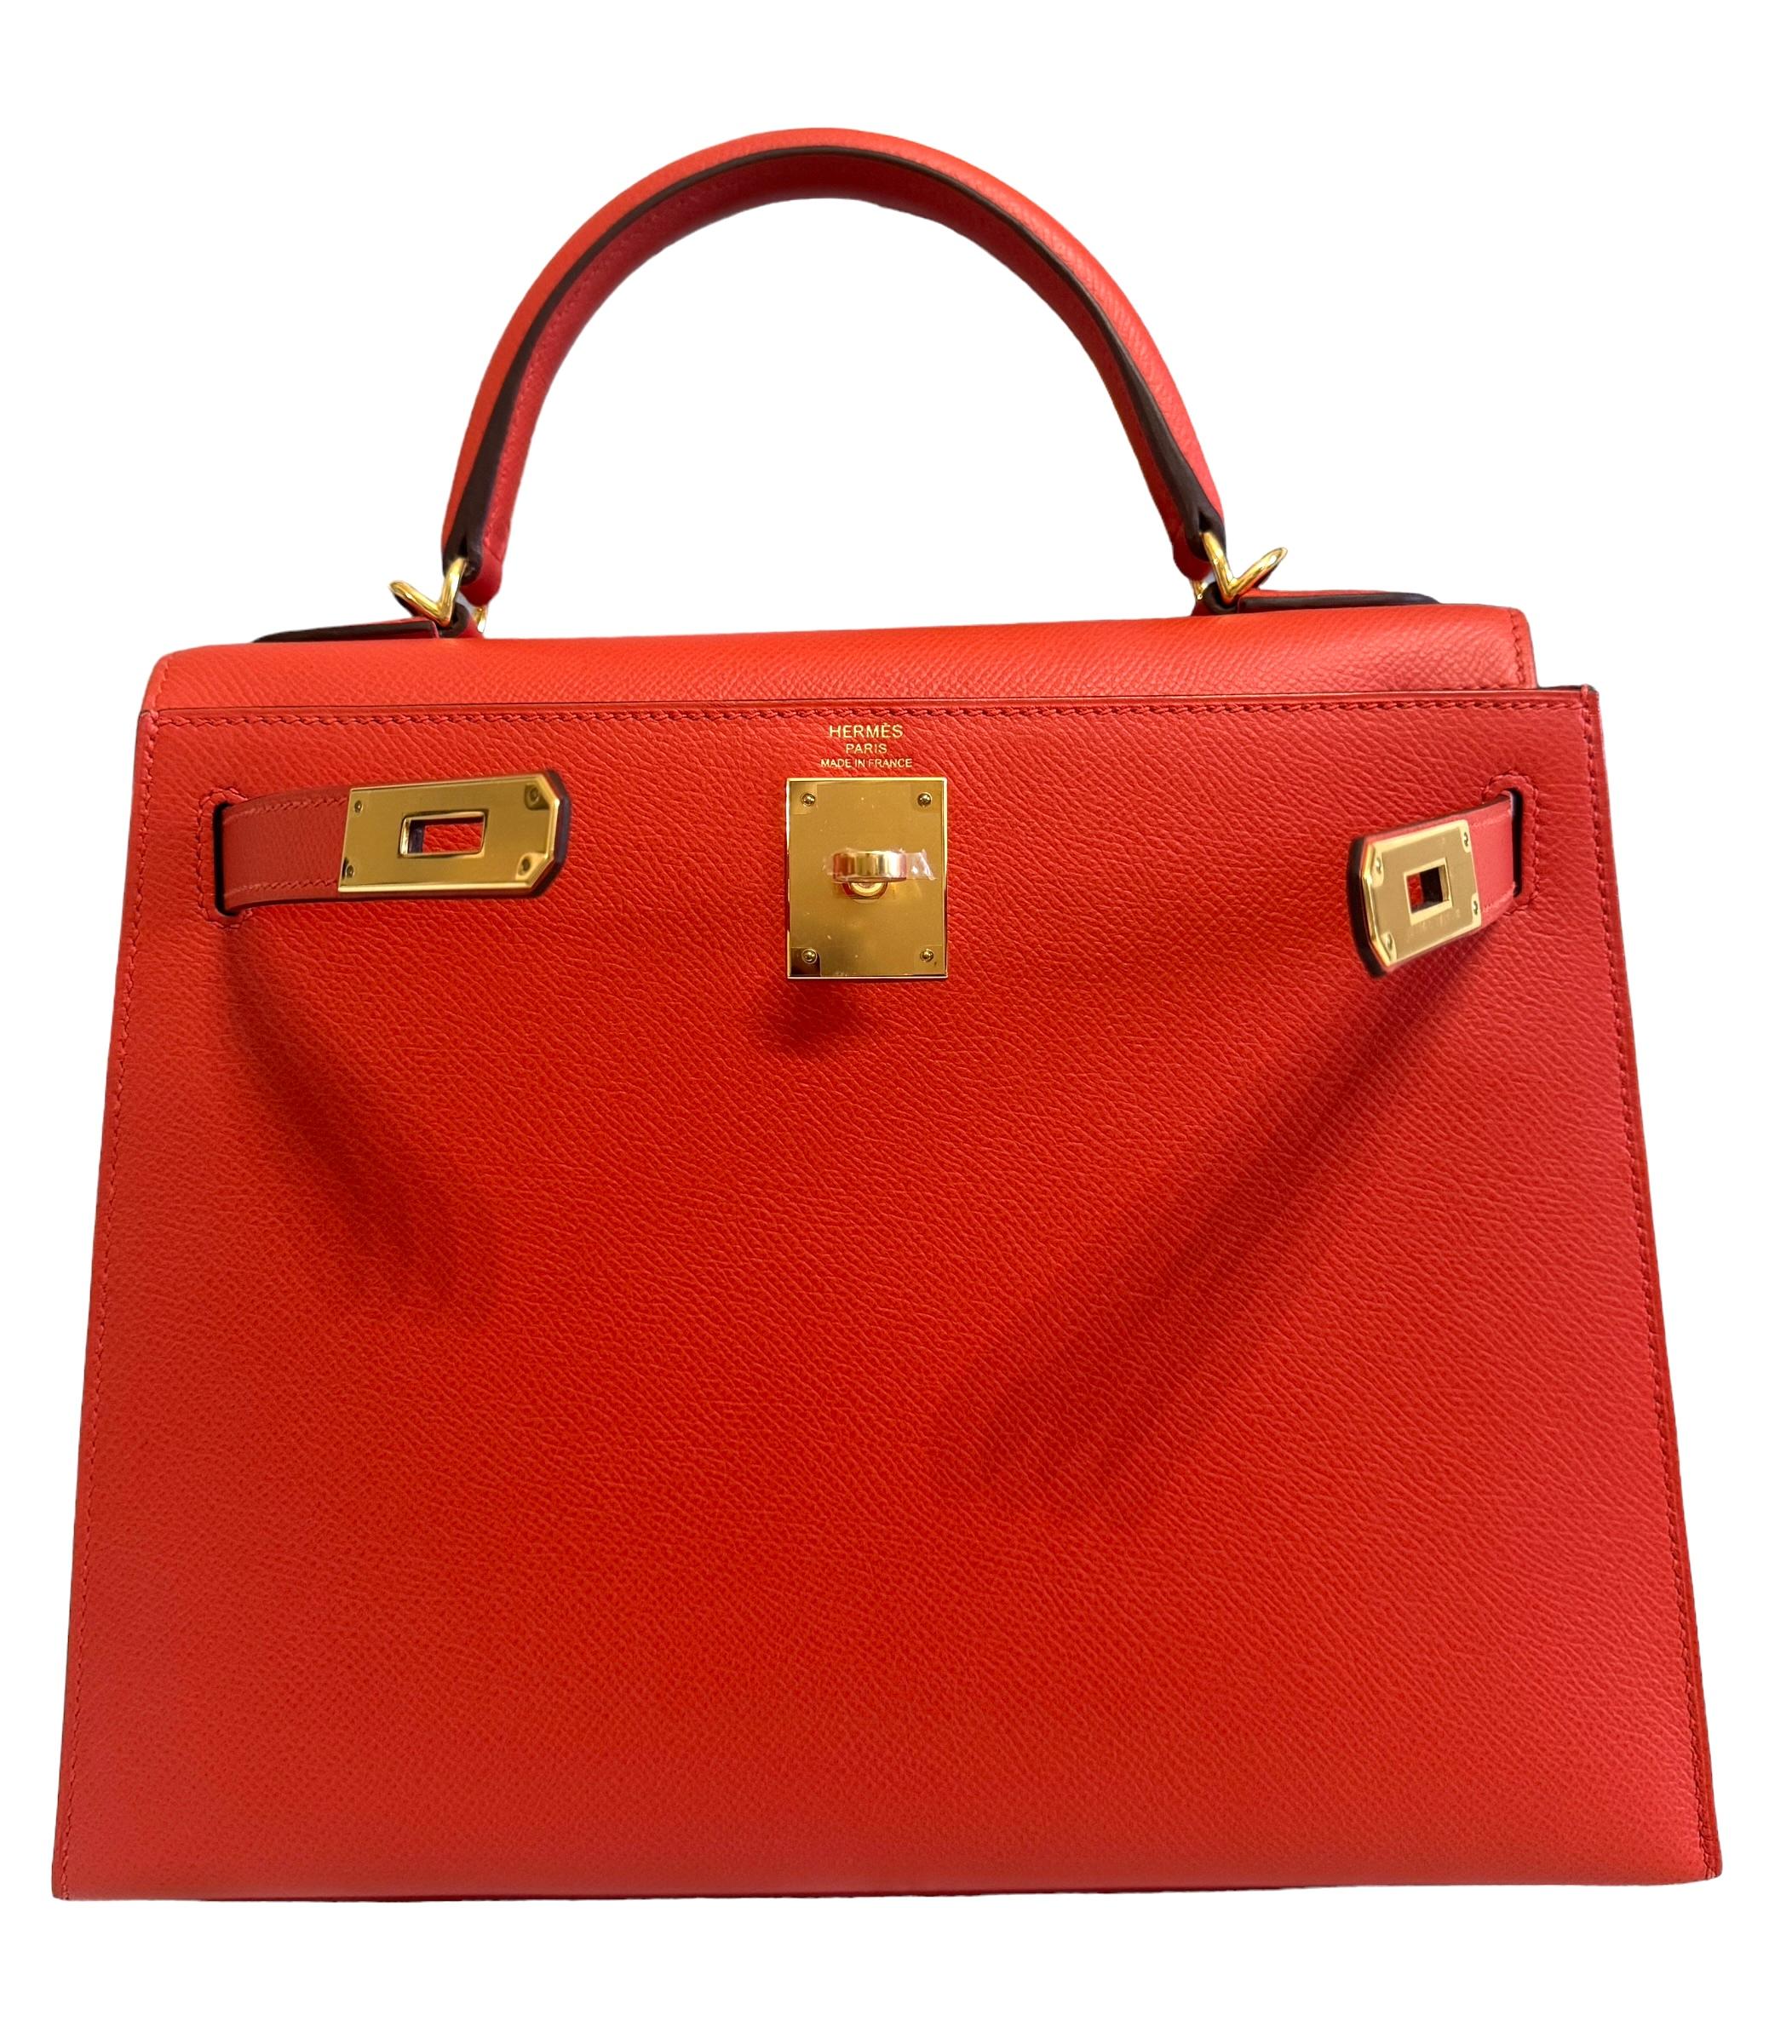 Hermes Kelly 28 Sellier Capucine Orange Red Epsom Leather Gold Hardware New In New Condition For Sale In Miami, FL